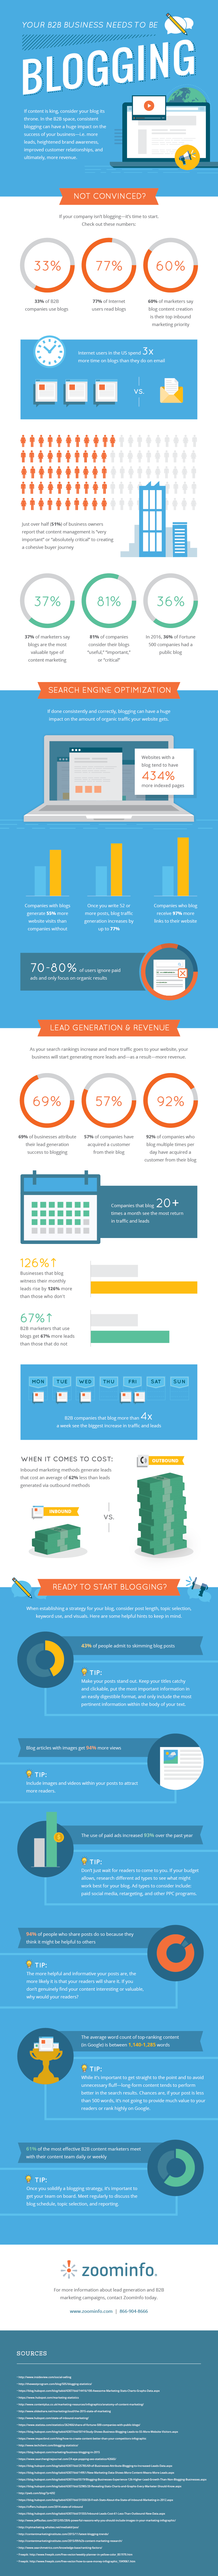 A Marketer's Guide to B2B Blogging Success - #infographic